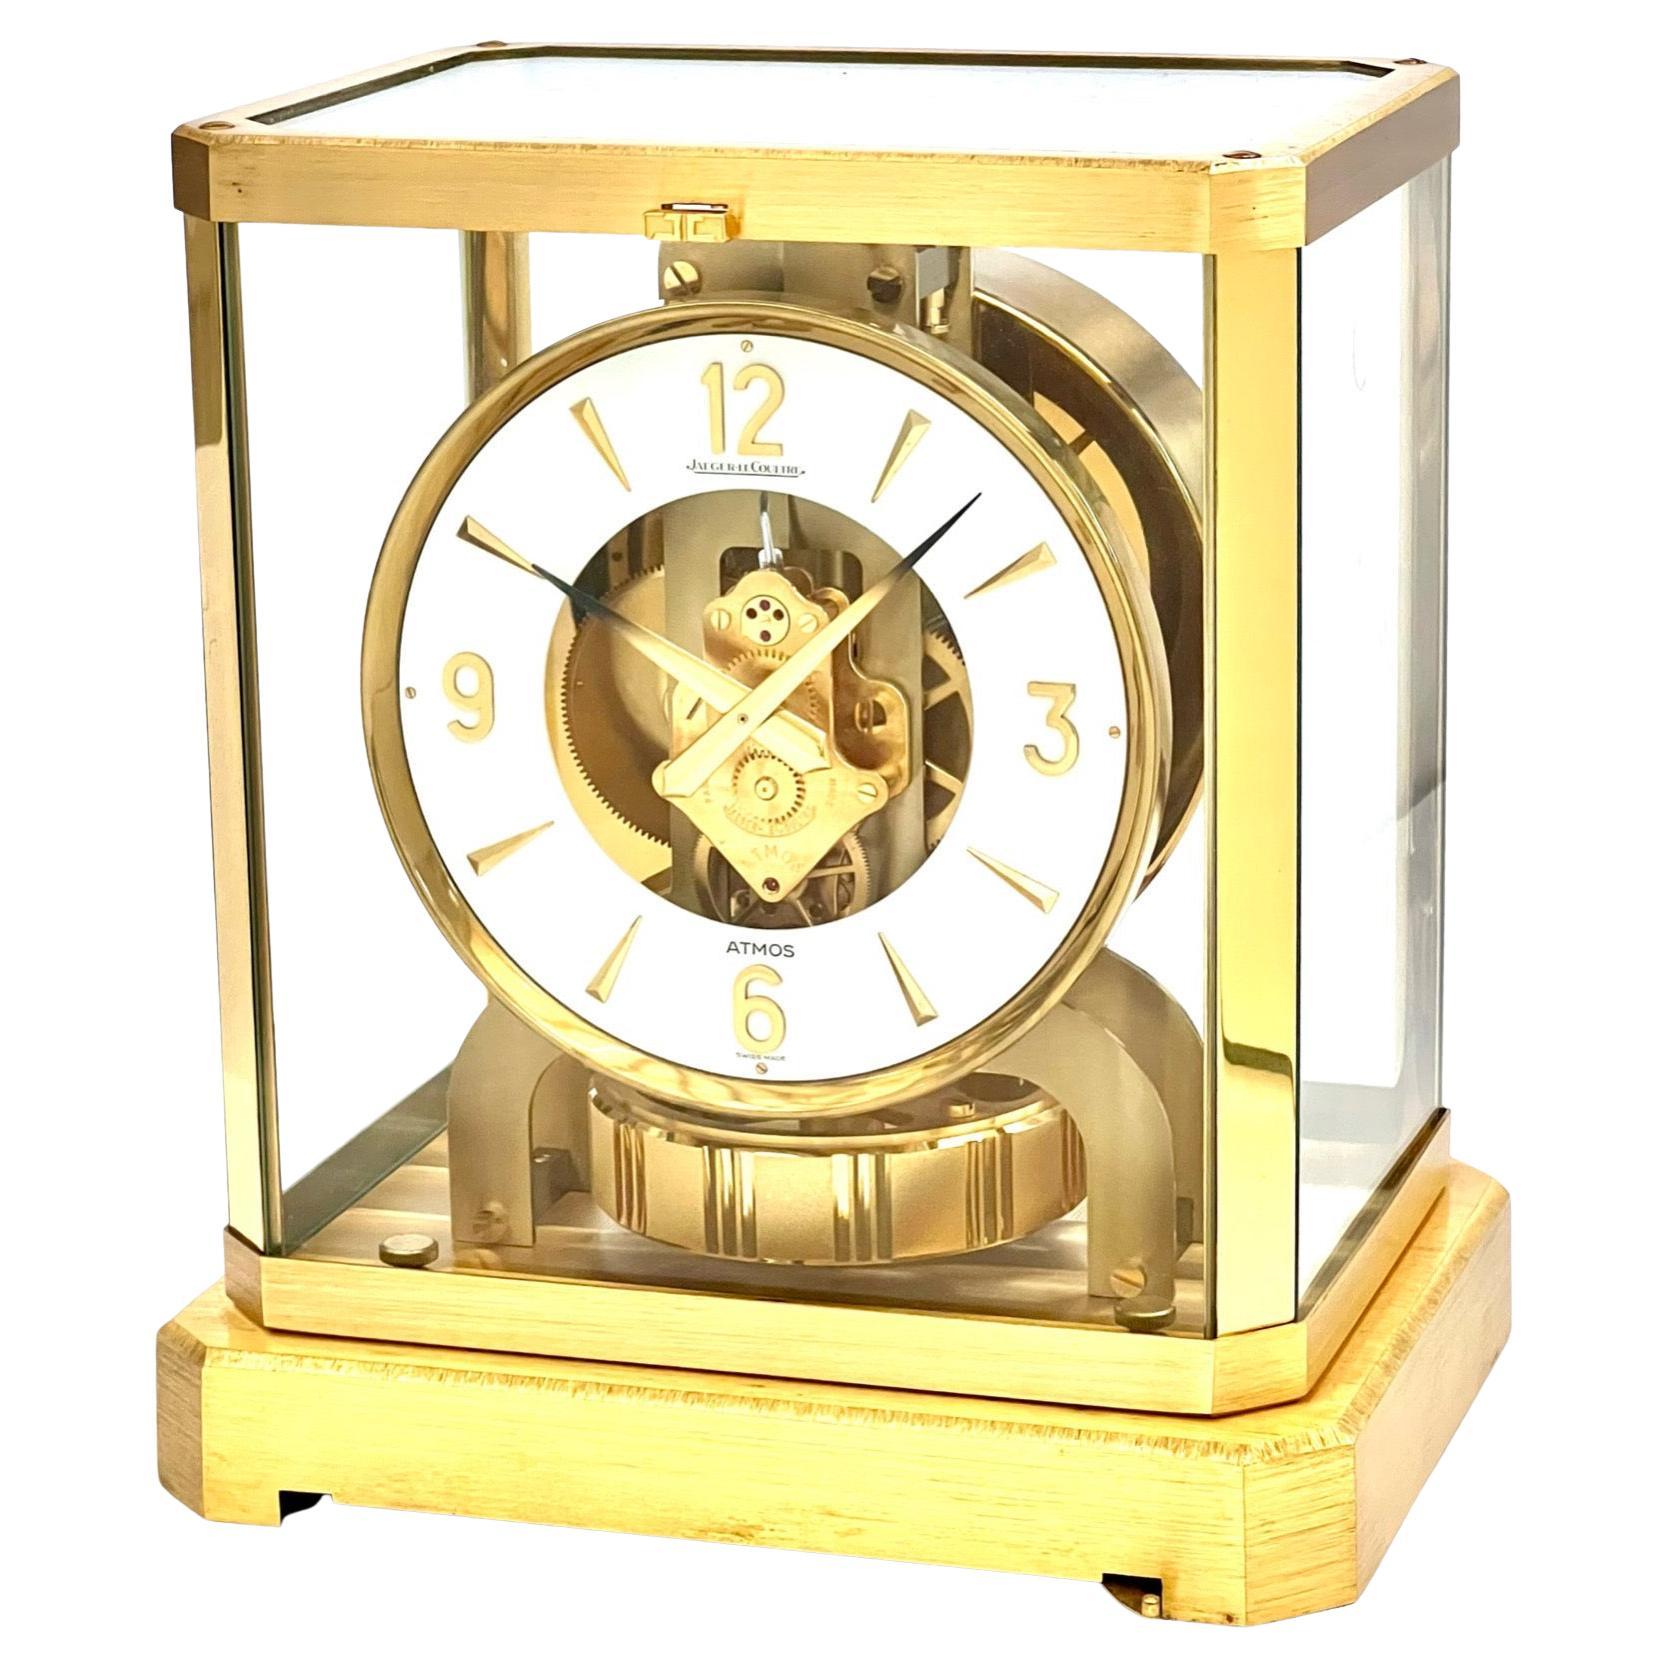 Jaeger LeCoultre Mid Century Gilt Brass and Glass Atmos Clock